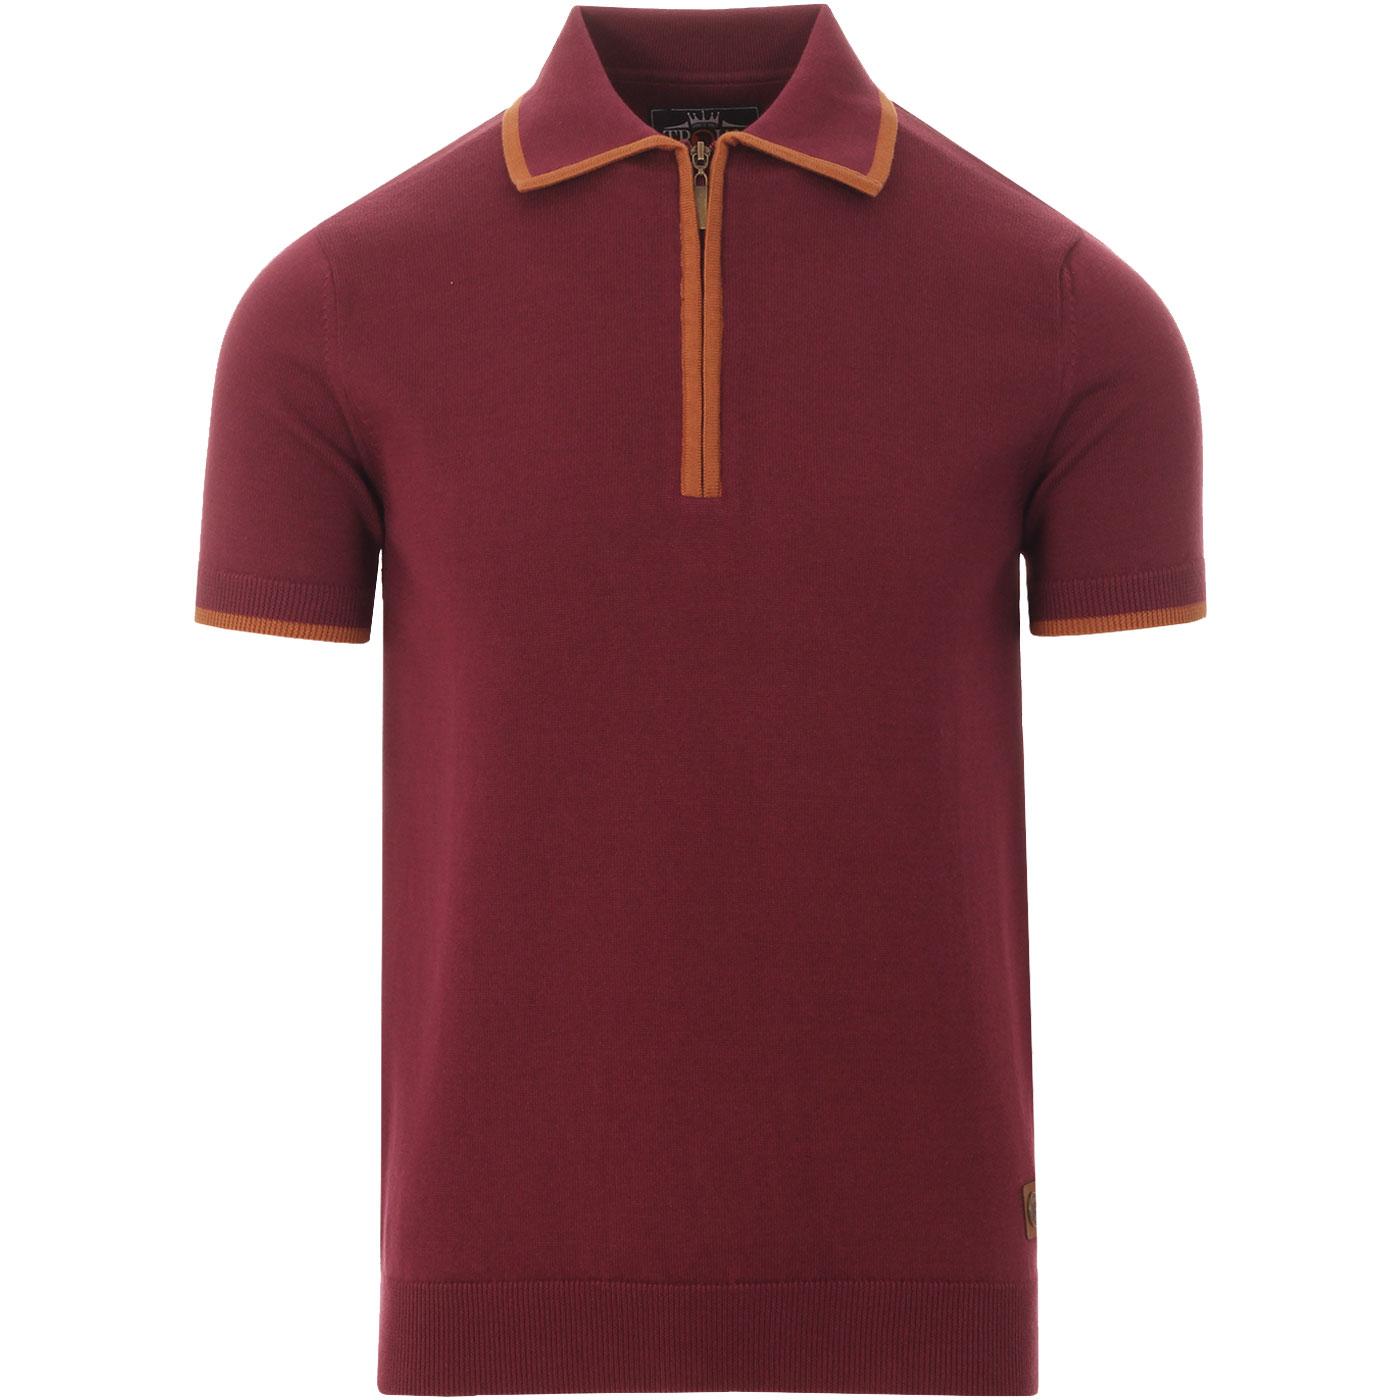 TROJAN RECORDS Mod Zip Placket Knitted Polo Top P